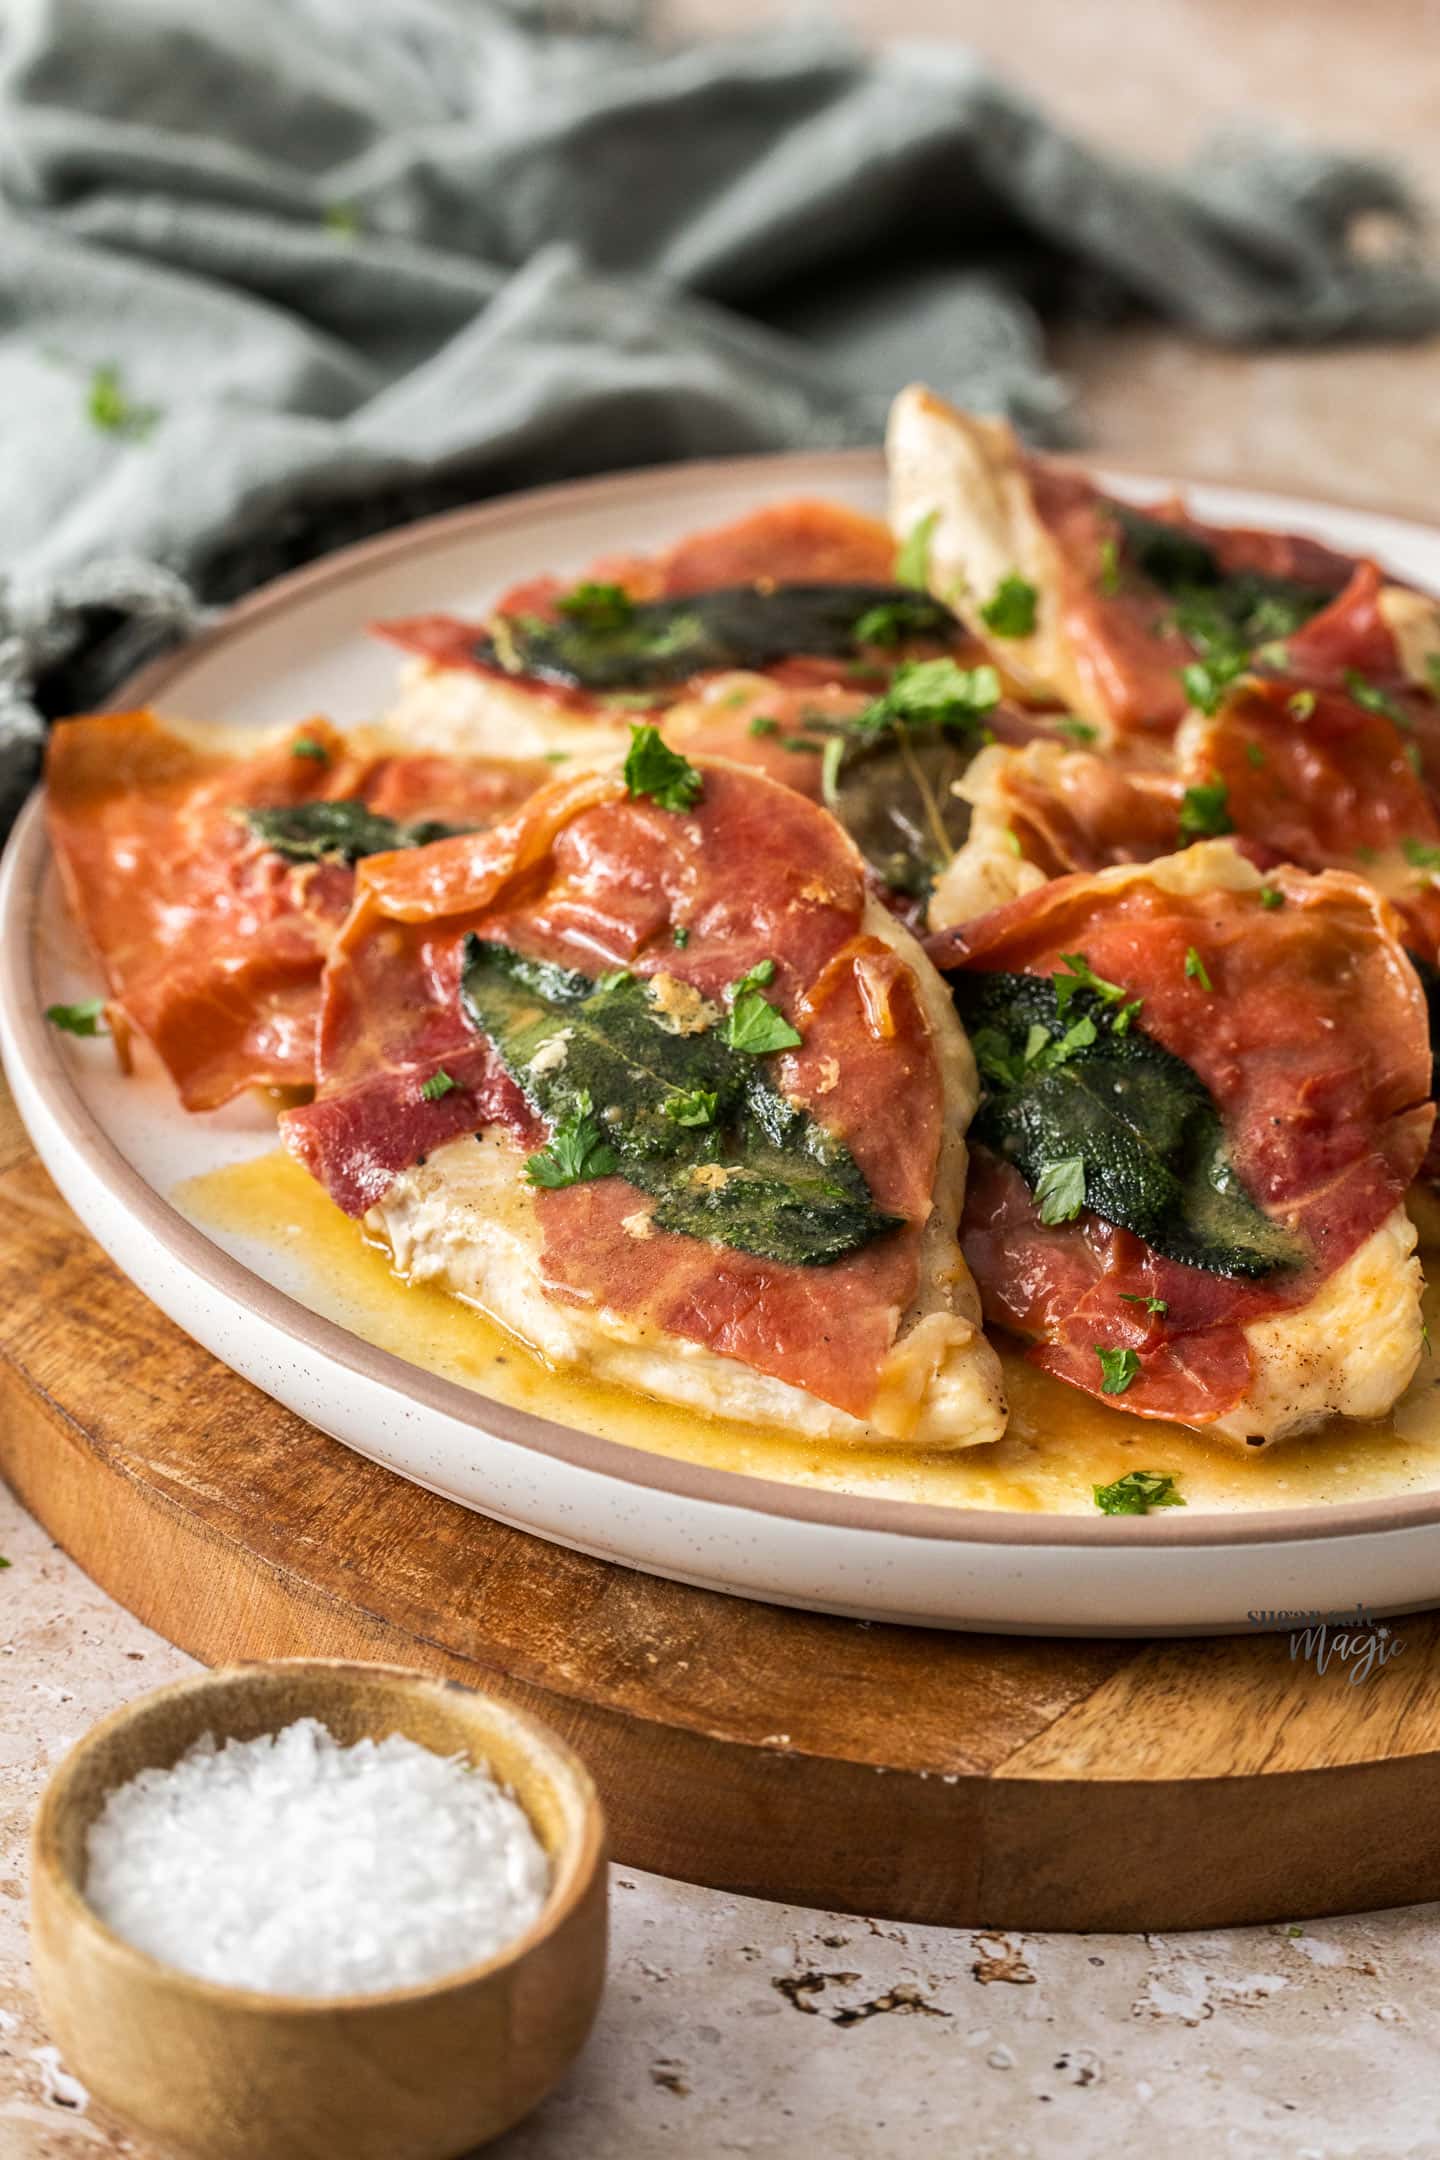 Slices of saltimbocca on a plate.